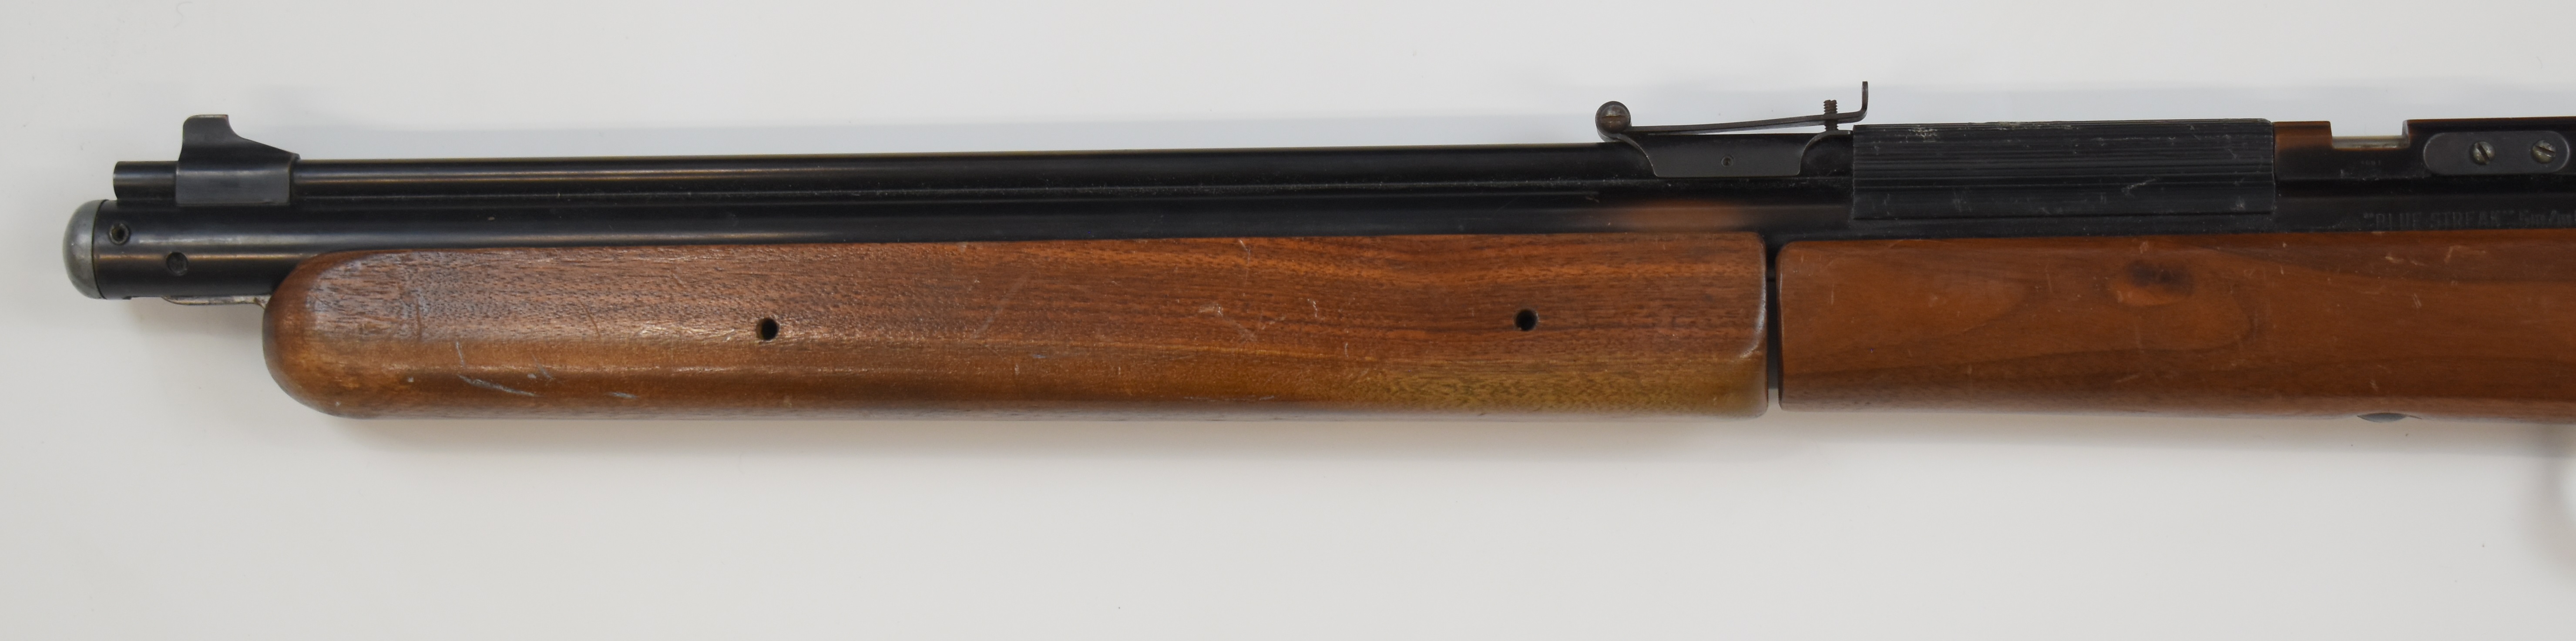 Sheridan Blue Streak .20 bolt-action air rifle with wooden semi-pistol grip and forend and - Image 8 of 8